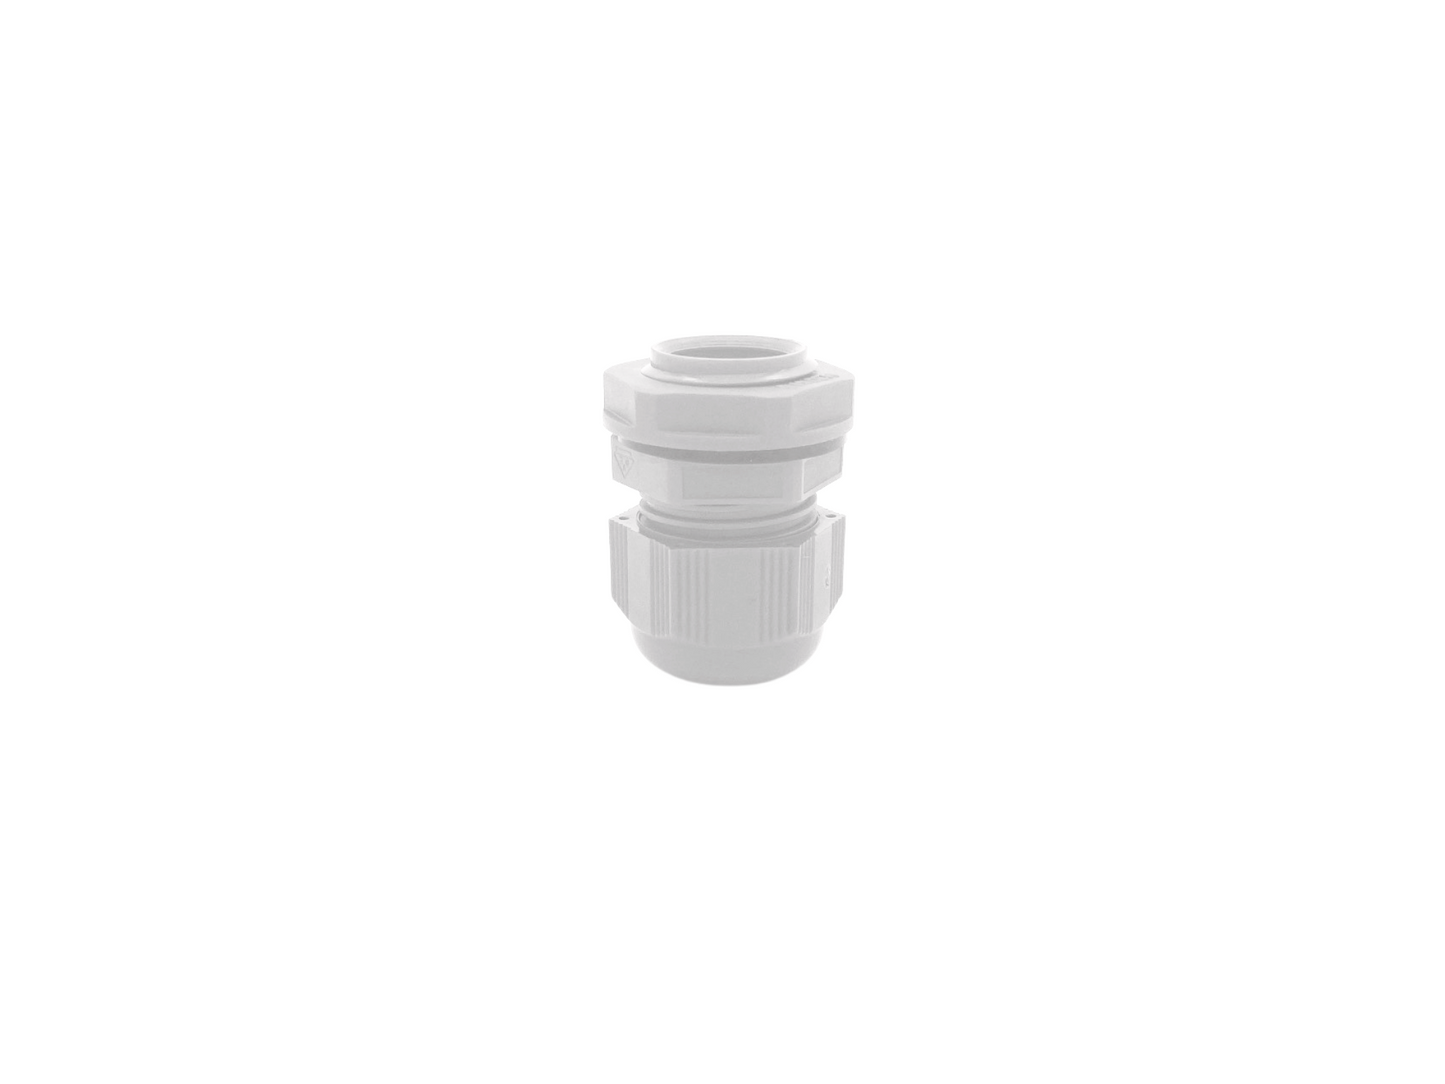 Nylon Cable Gland IP68 20mm Pack of 10 - White